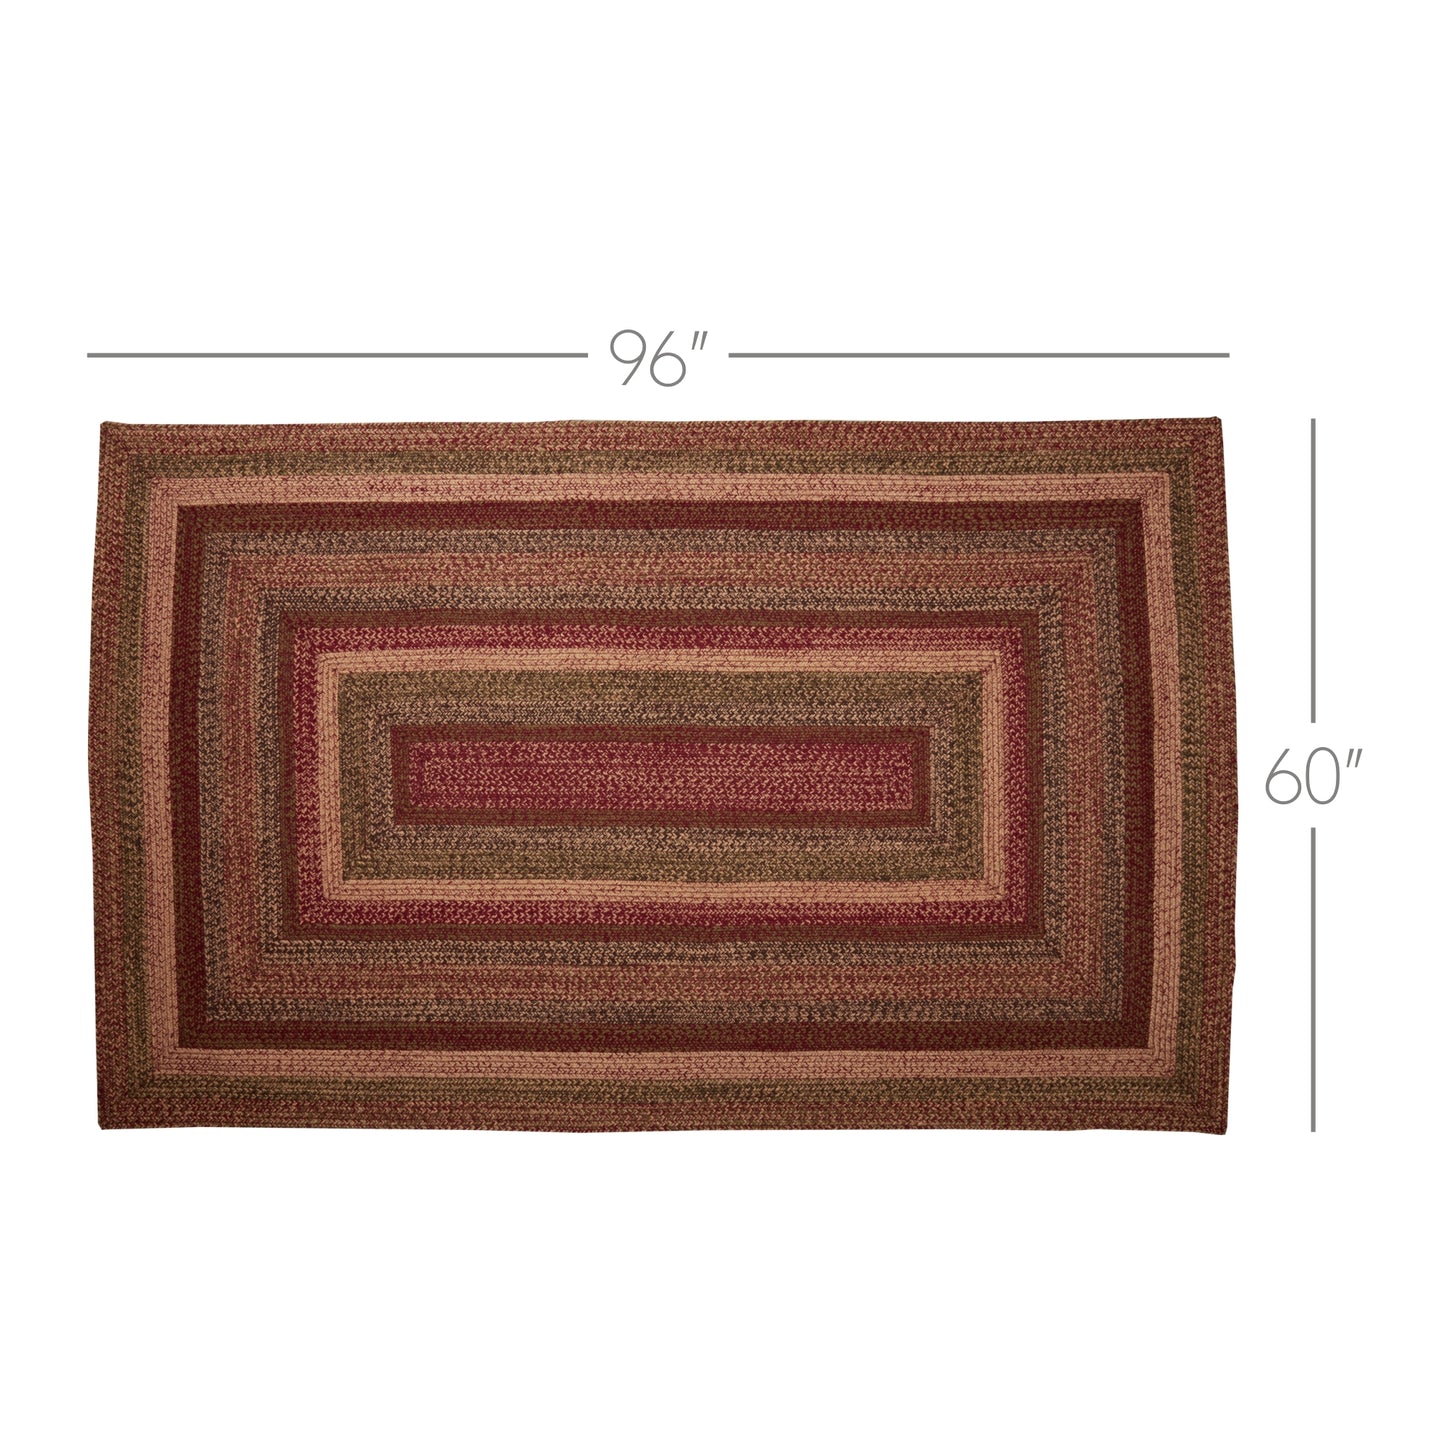 69419-Cider-Mill-Jute-Rug-Rect-w-Pad-60x96-image-2